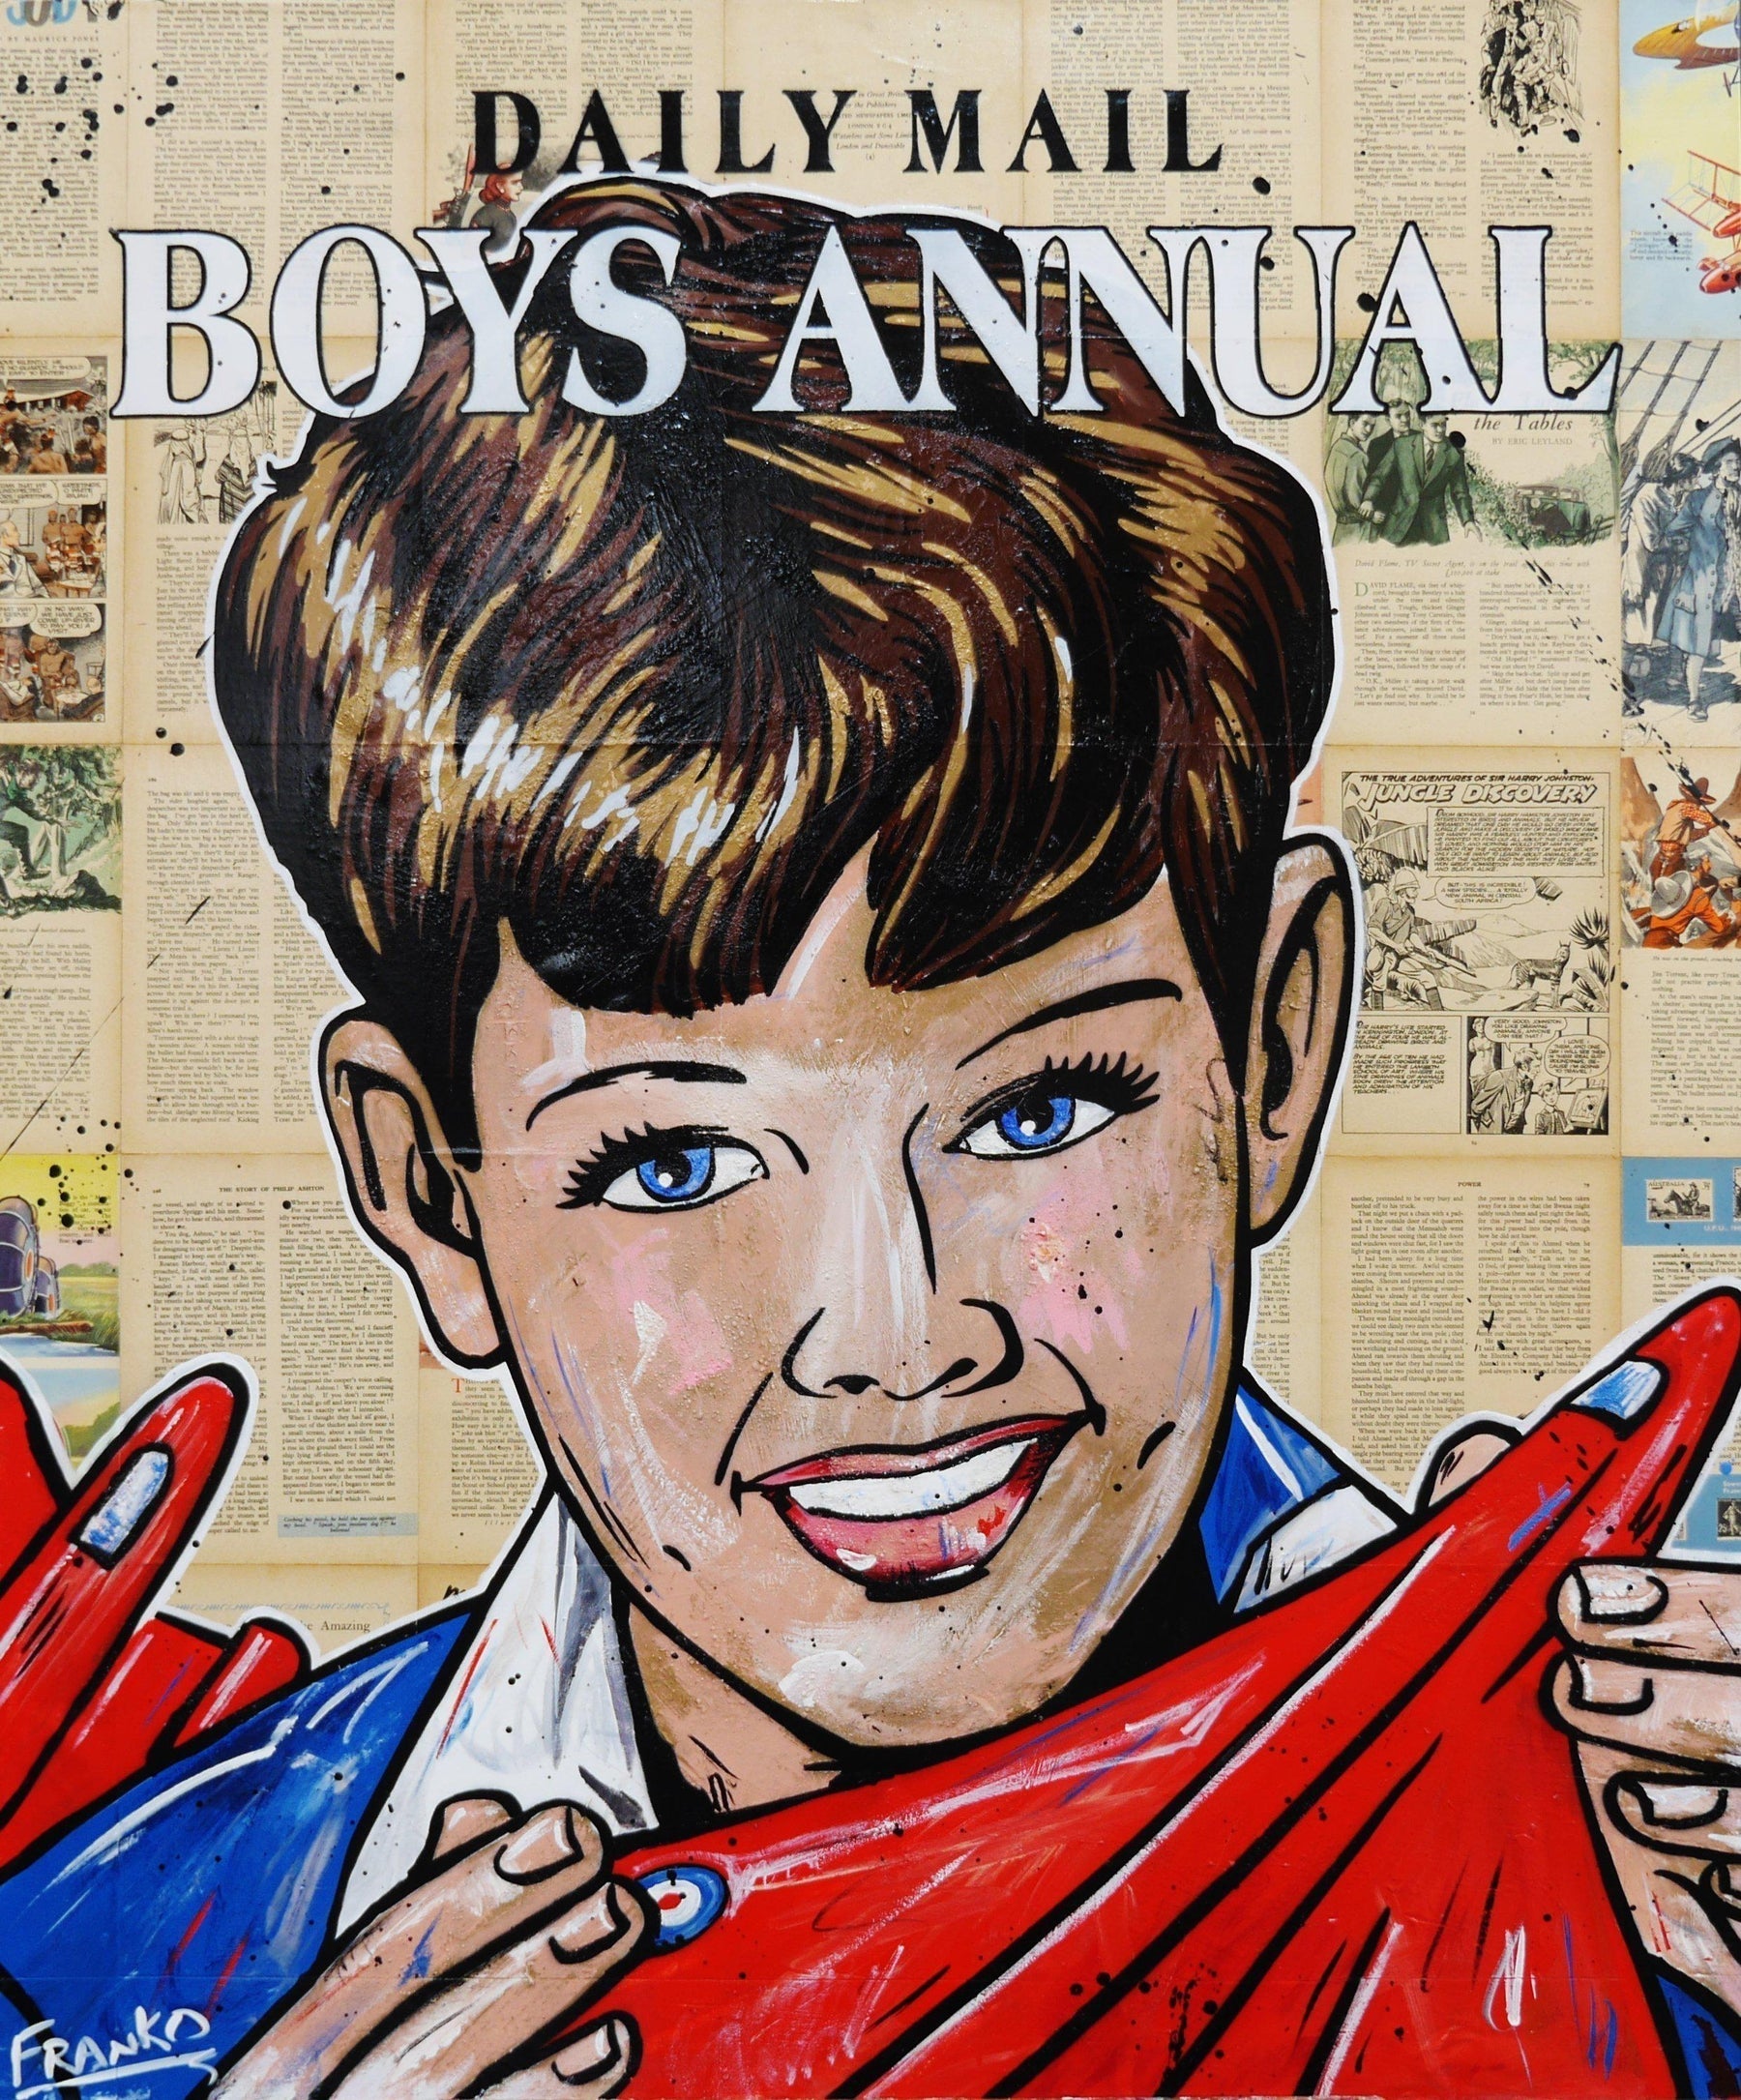 The Daily Mail 120cm x 100cm The Daily Mail Boys Annual Vintage Book Pop art Painting-Abstract-Franko-[Franko]-[Australia_Art]-[Art_Lovers_Australia]-Franklin Art Studio